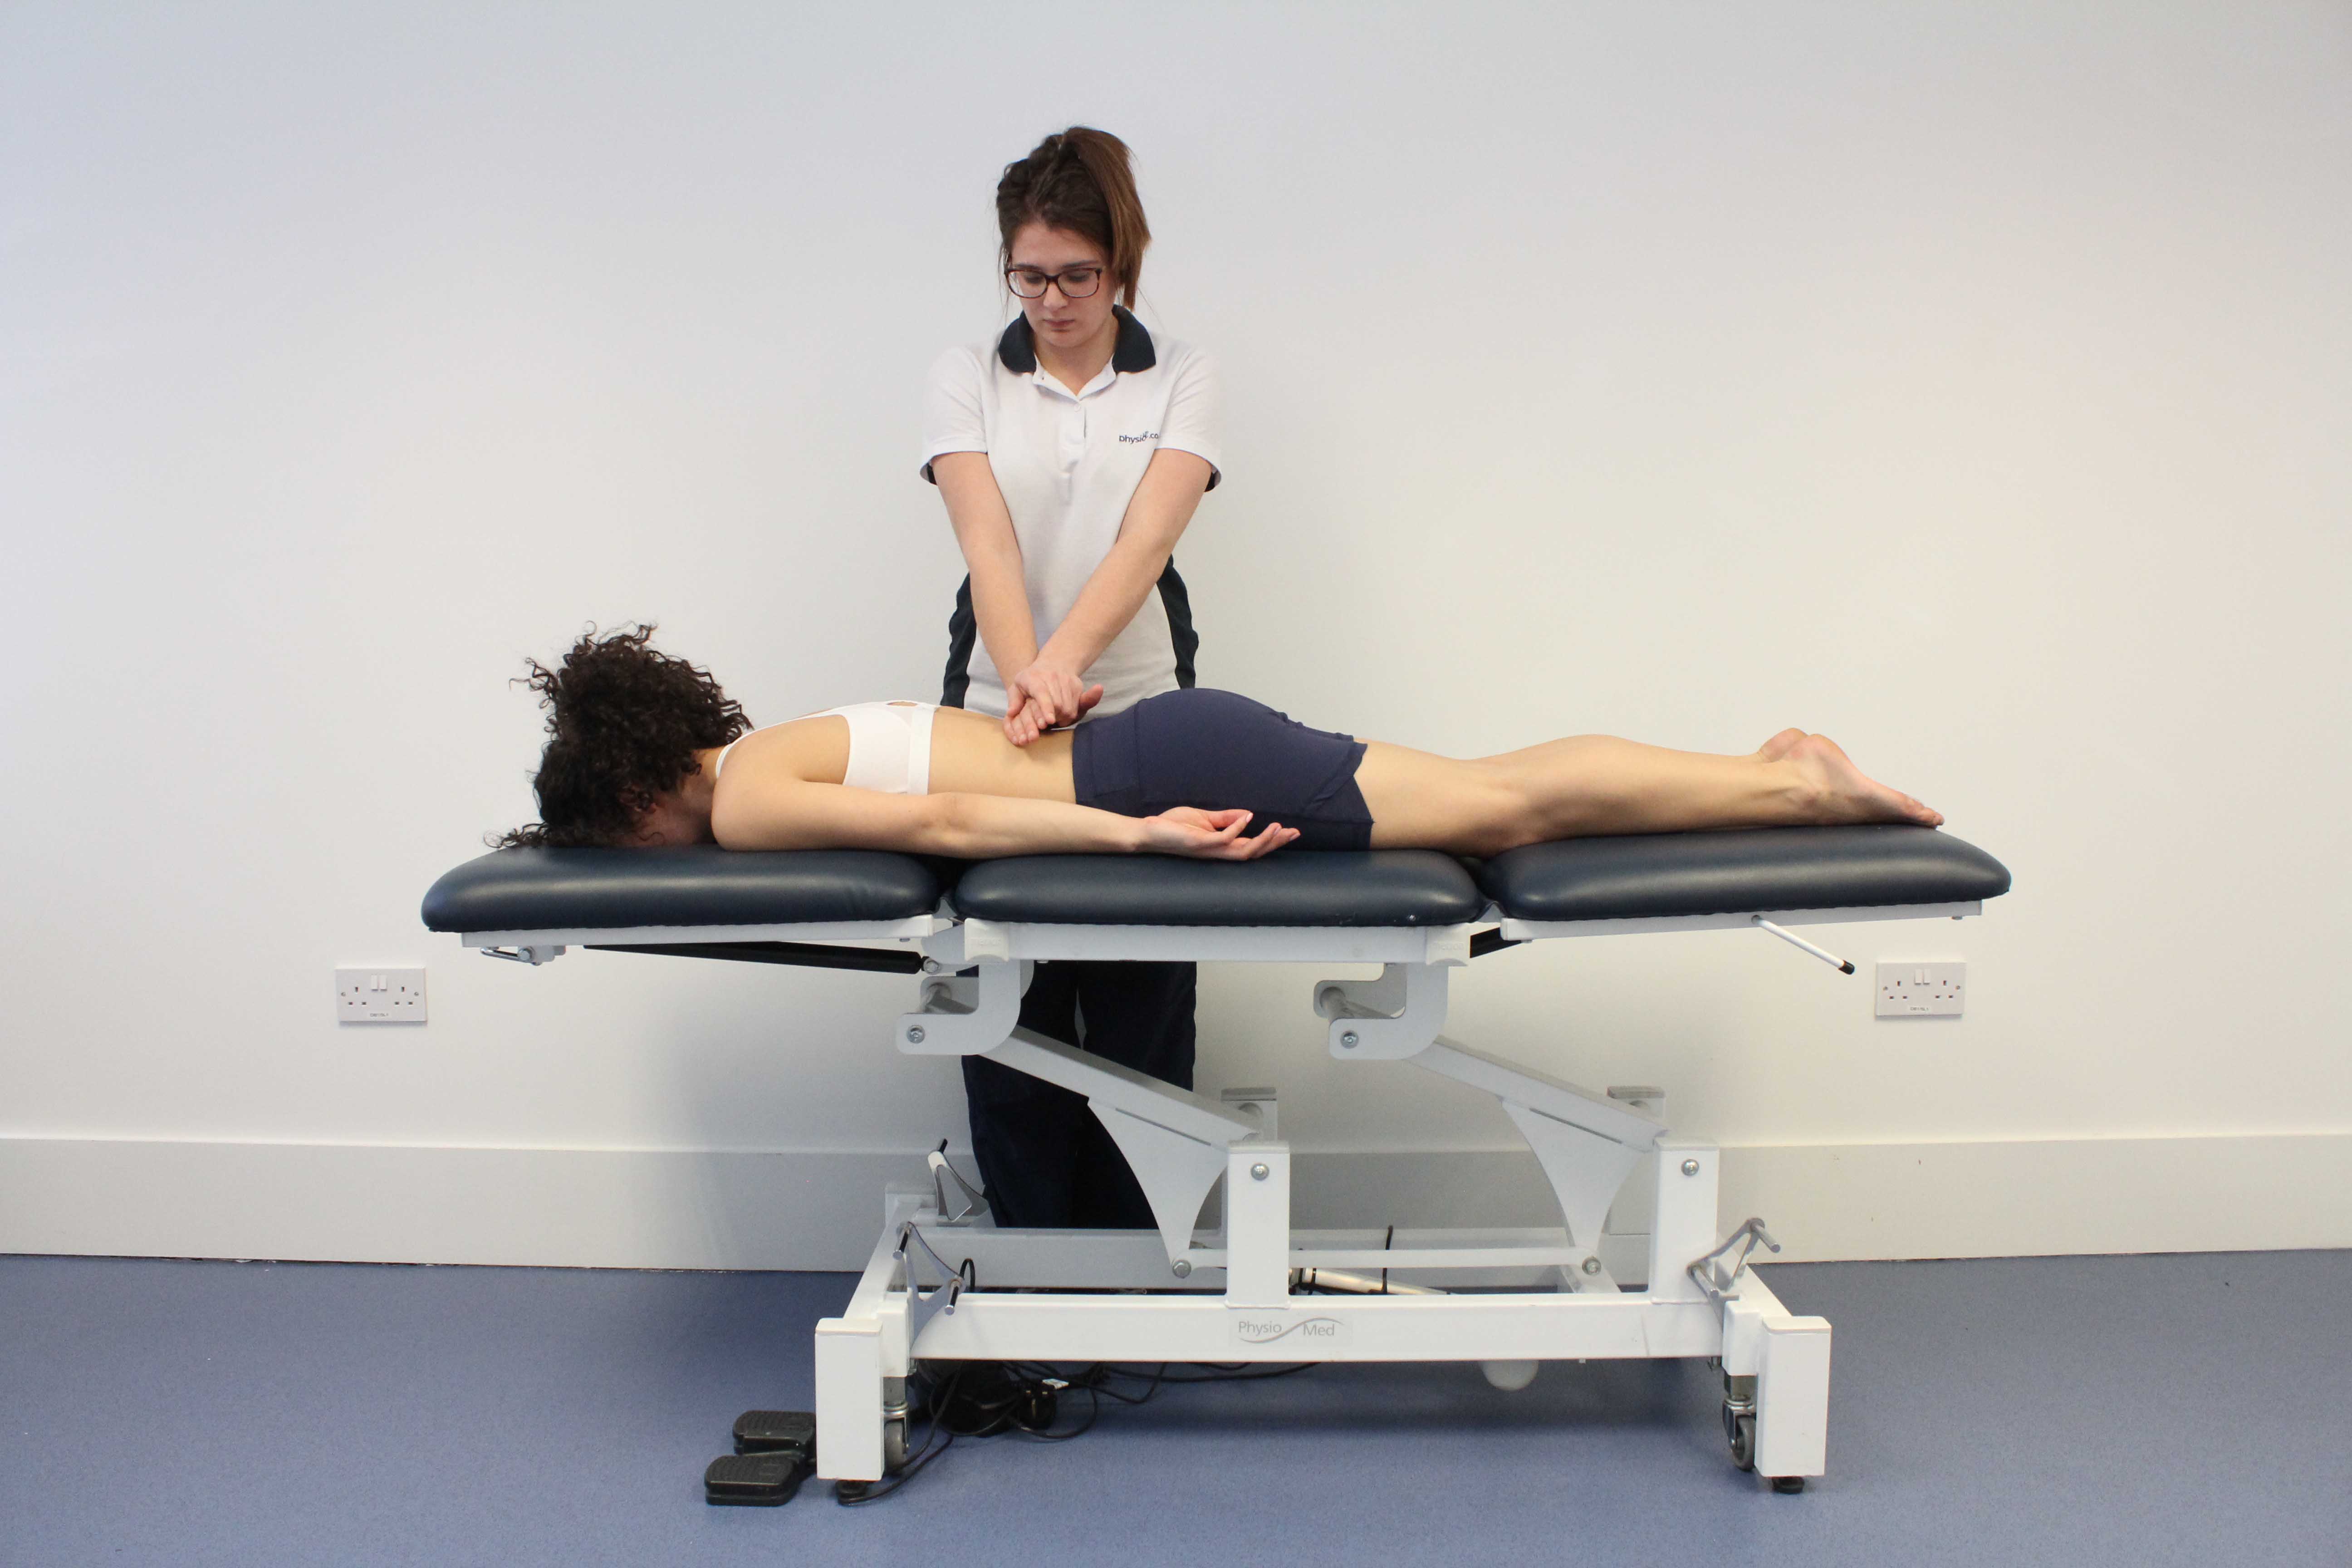 Experienced MSK physiotherapist conducting upper back assessment